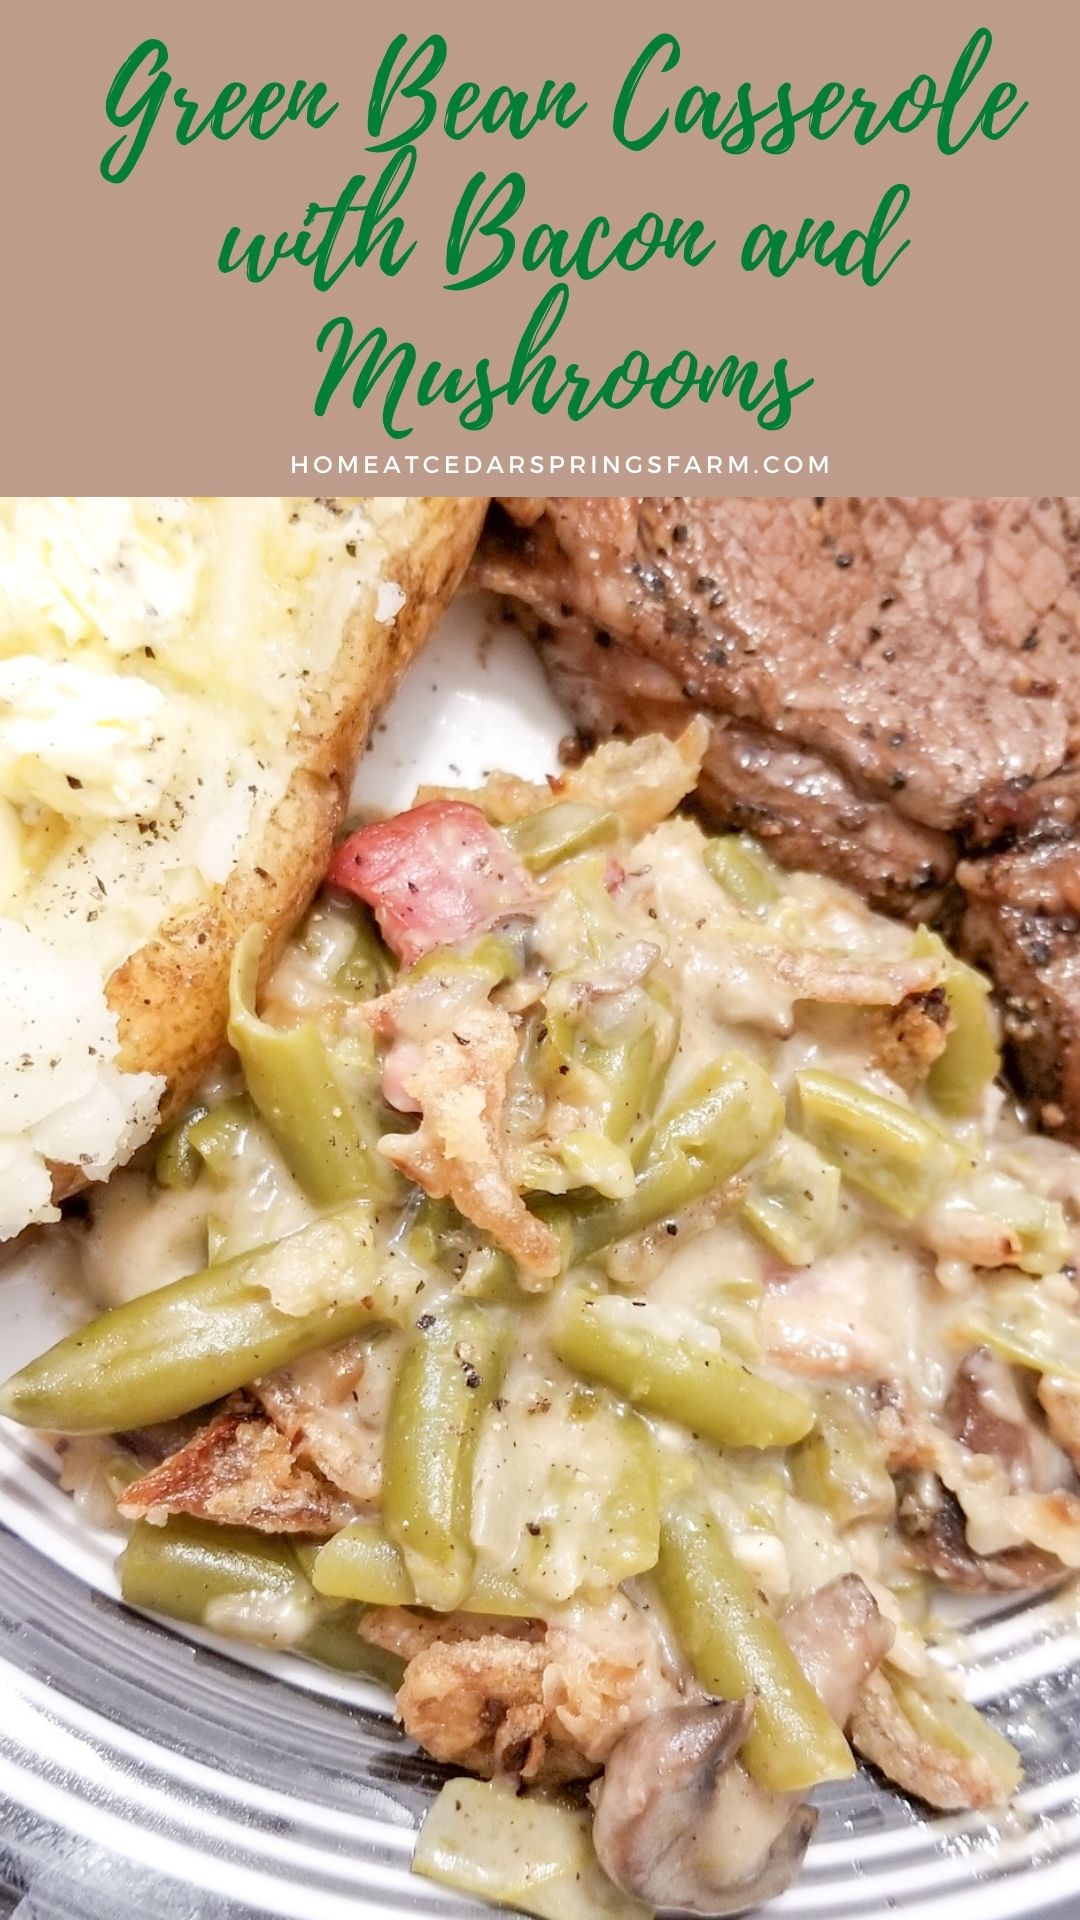 Green Bean Casserole with Bacon & Mushrooms with text overlay.